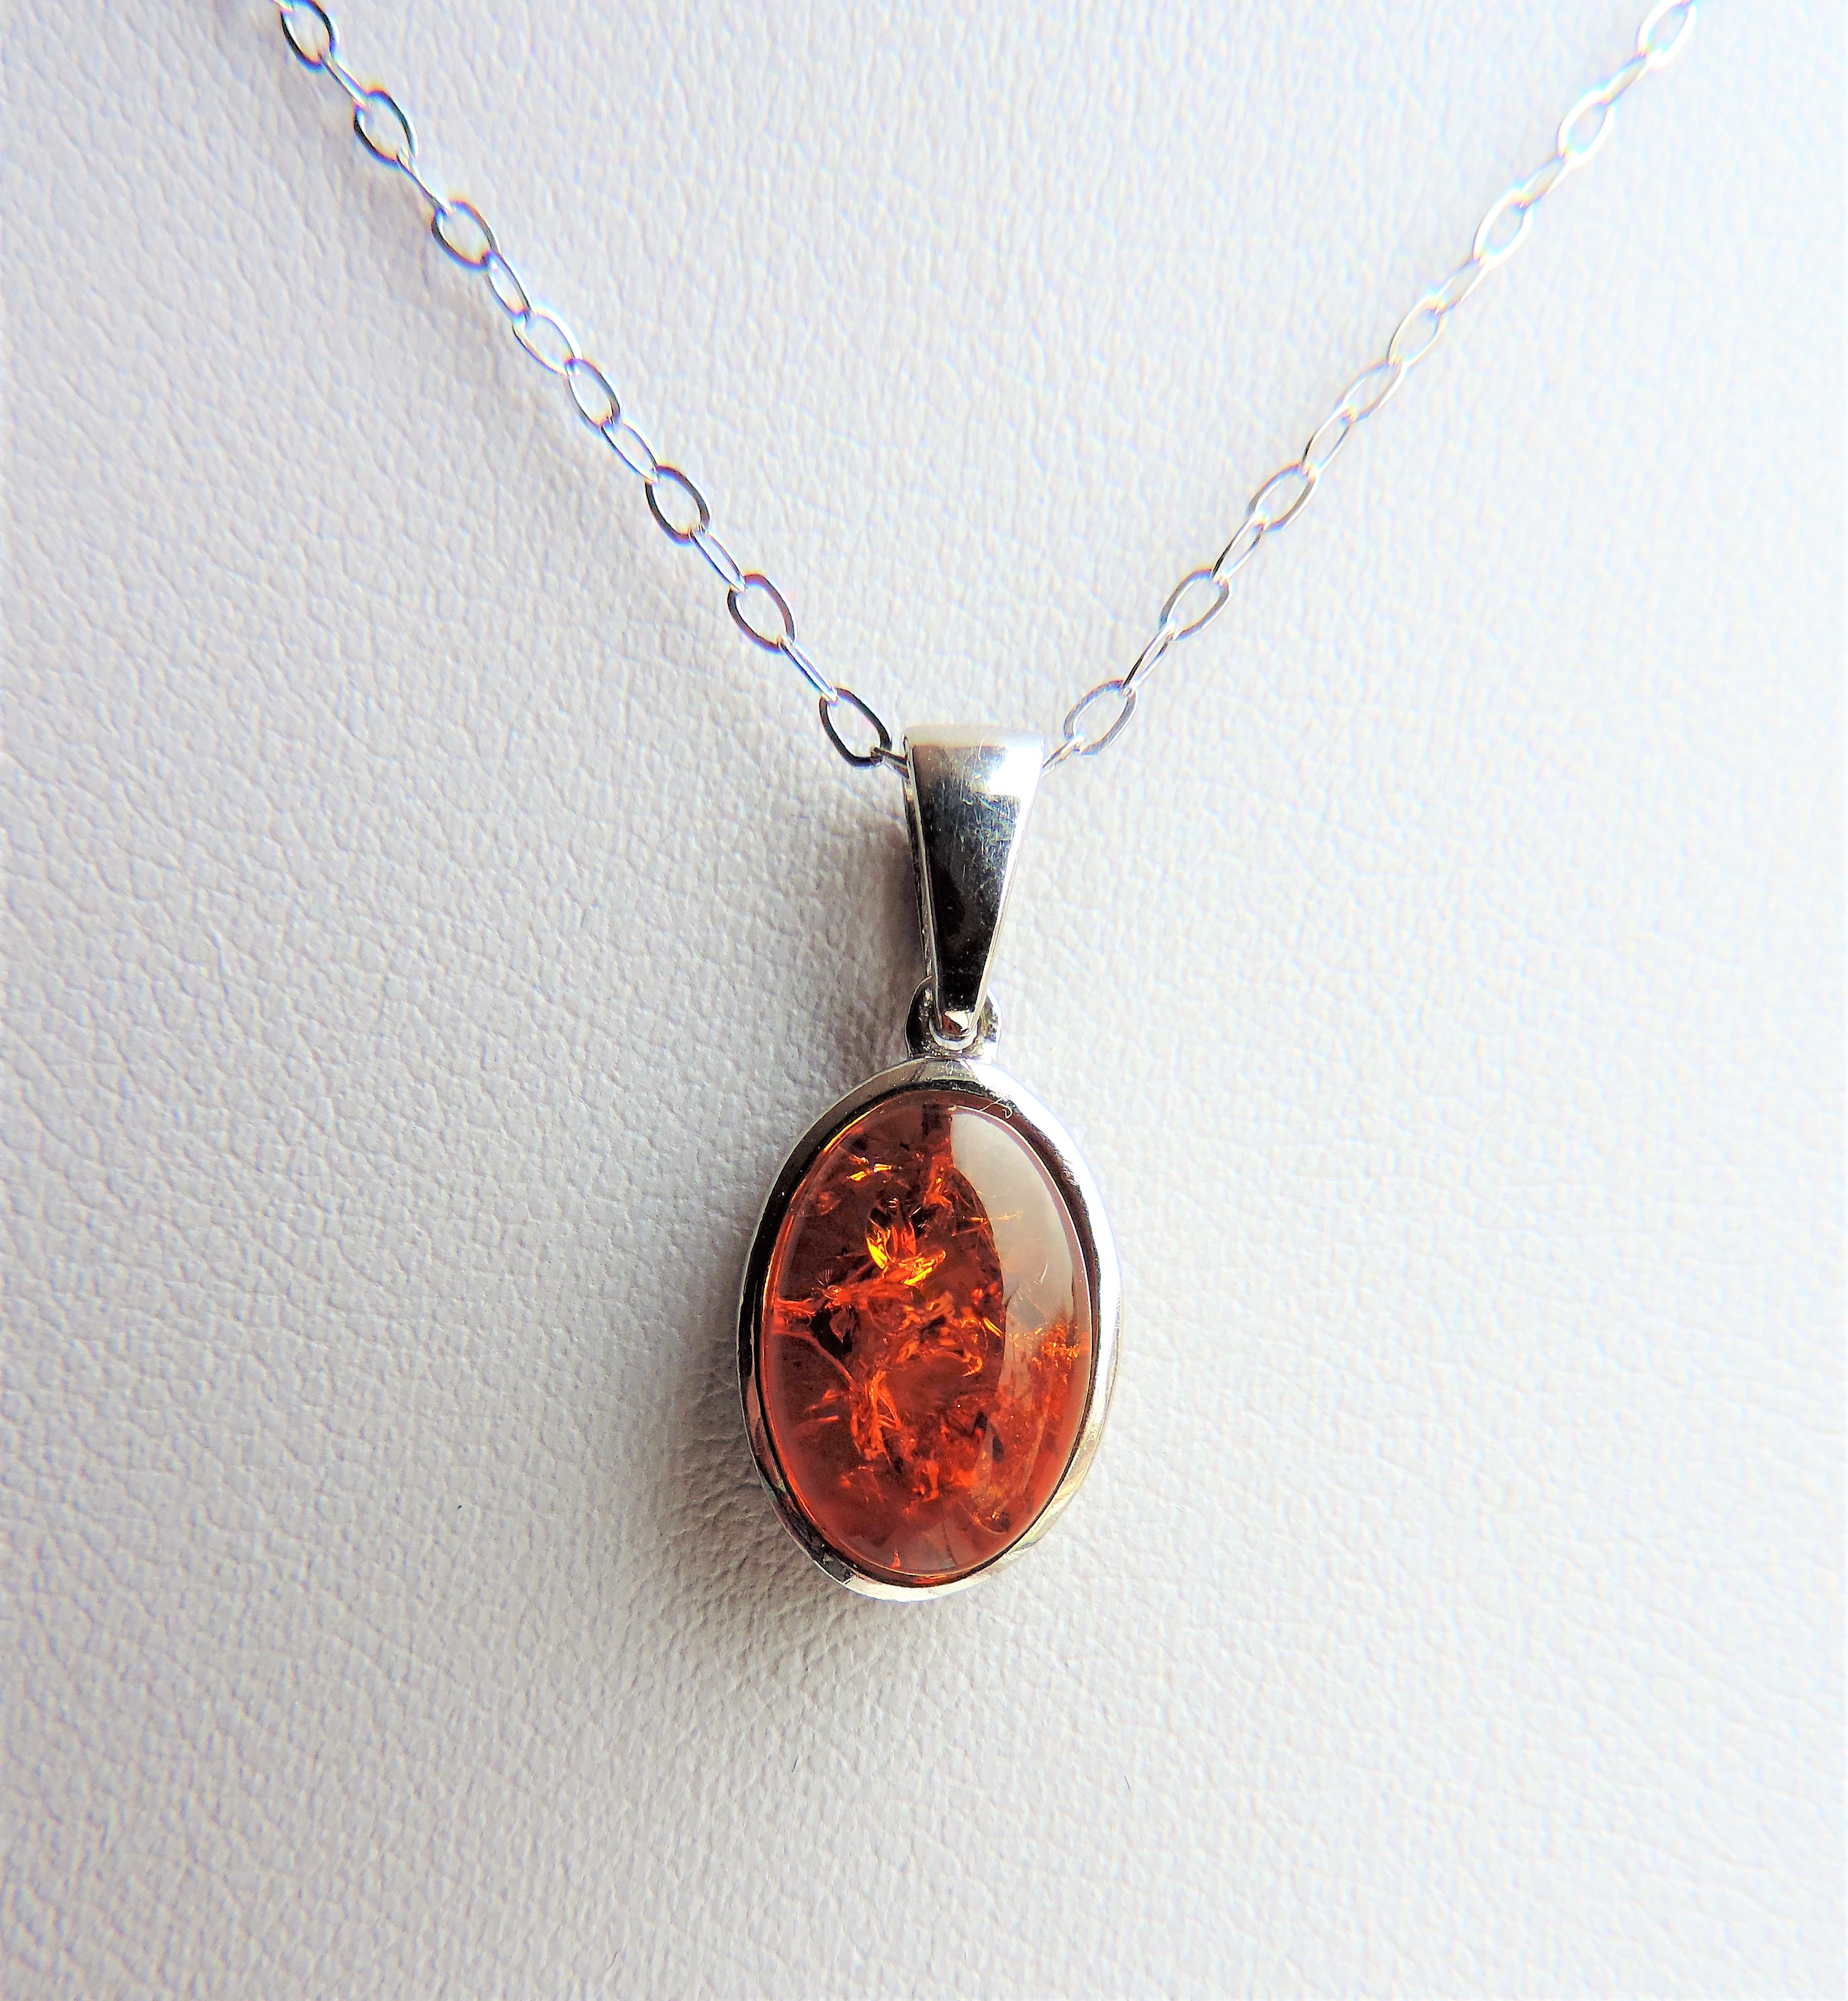 Sterling Silver Baltic Amber Pendant Necklace - Image 2 of 3